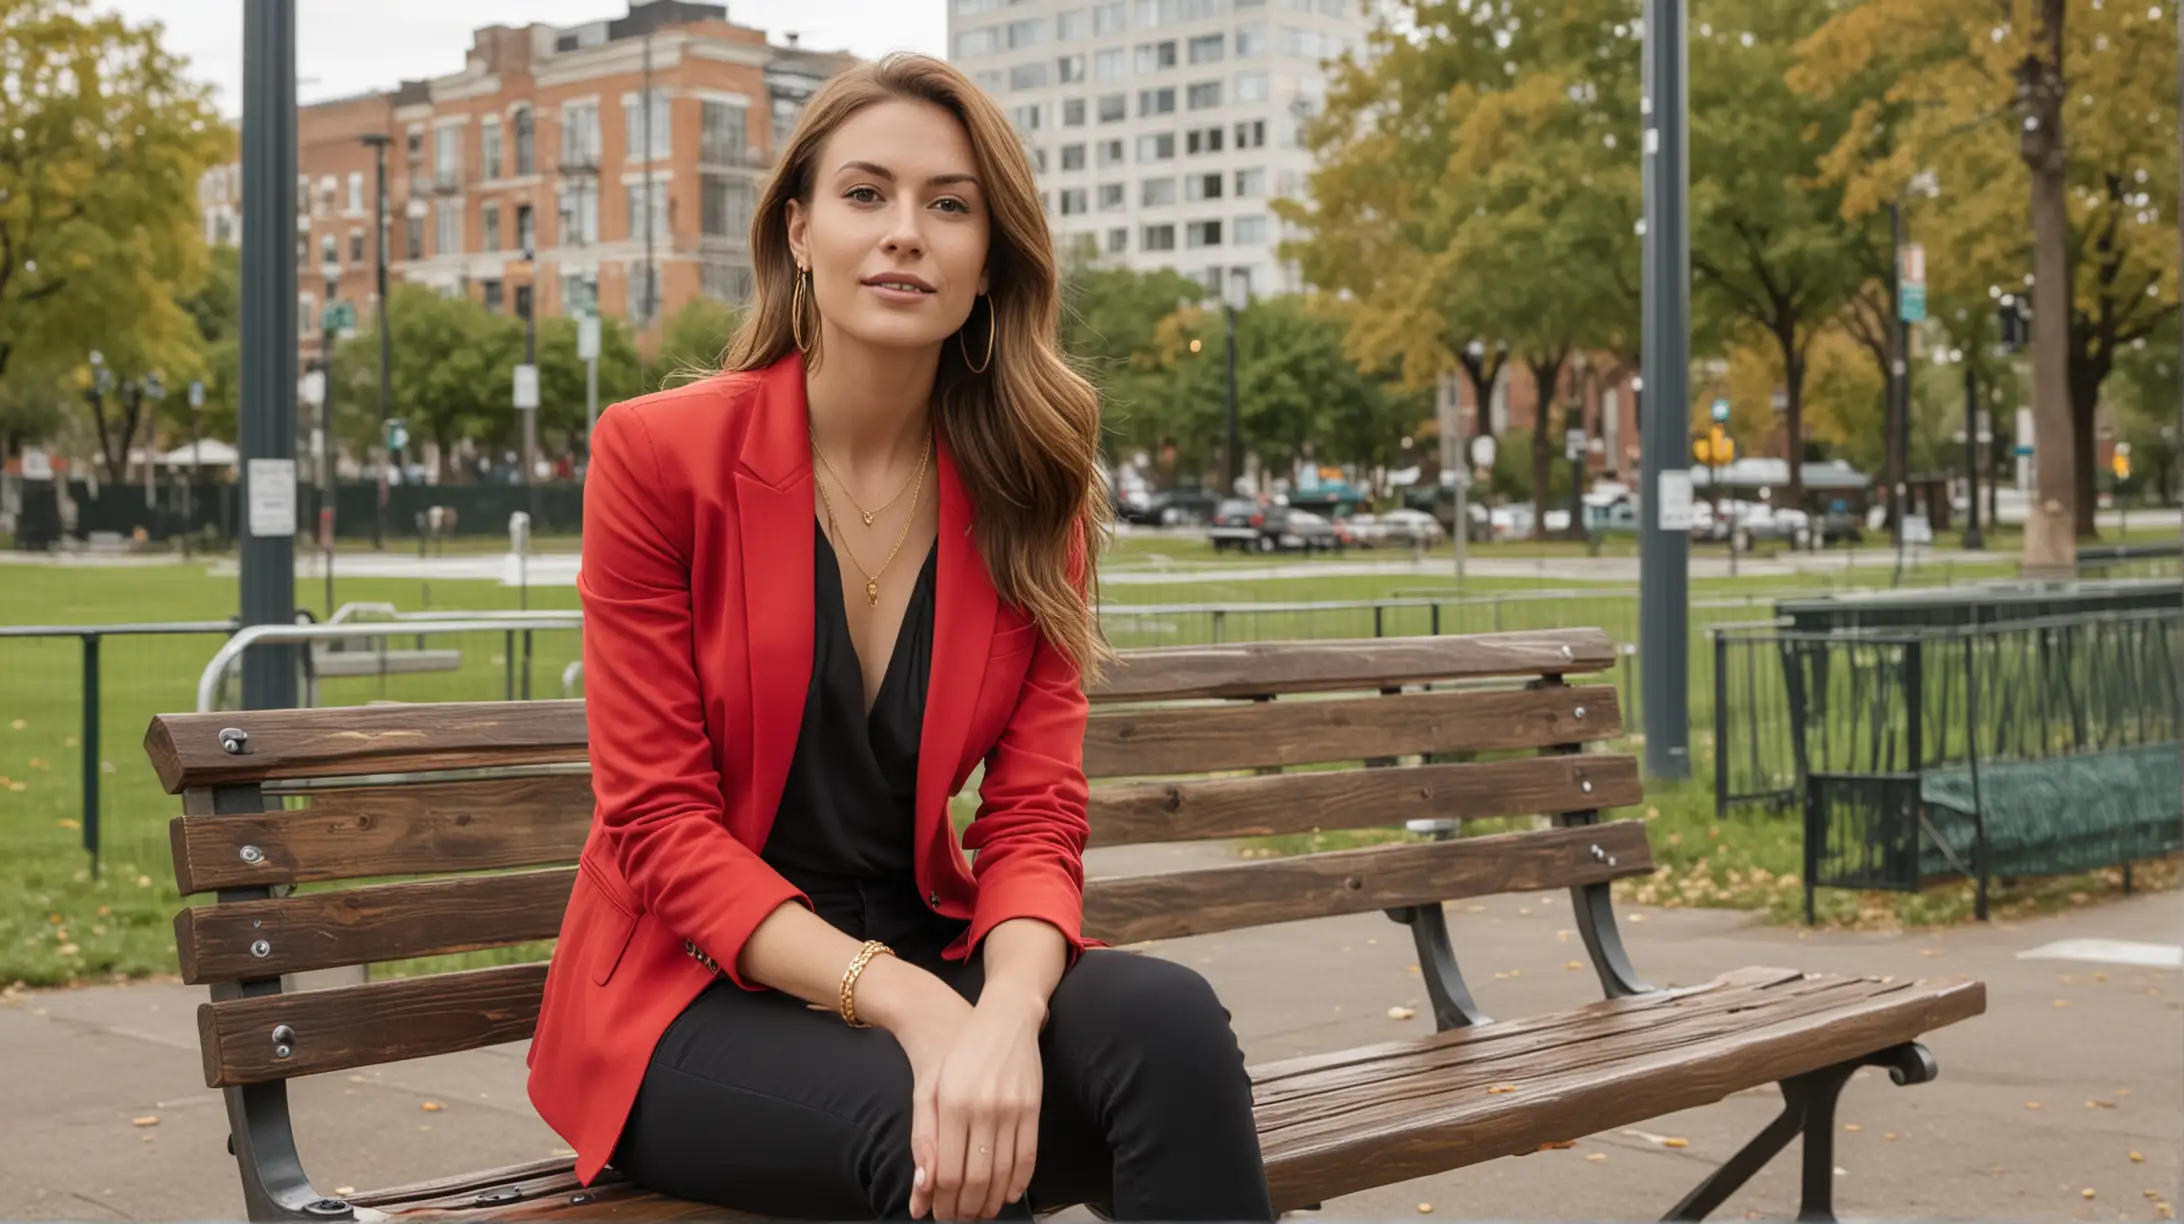 30 year old white woman sitting on a single park bench in an urban city park. She has long brown hair parted to the right. She is wearing a gold necklace, red blazer with low cut black shirt and black pants and black flats.